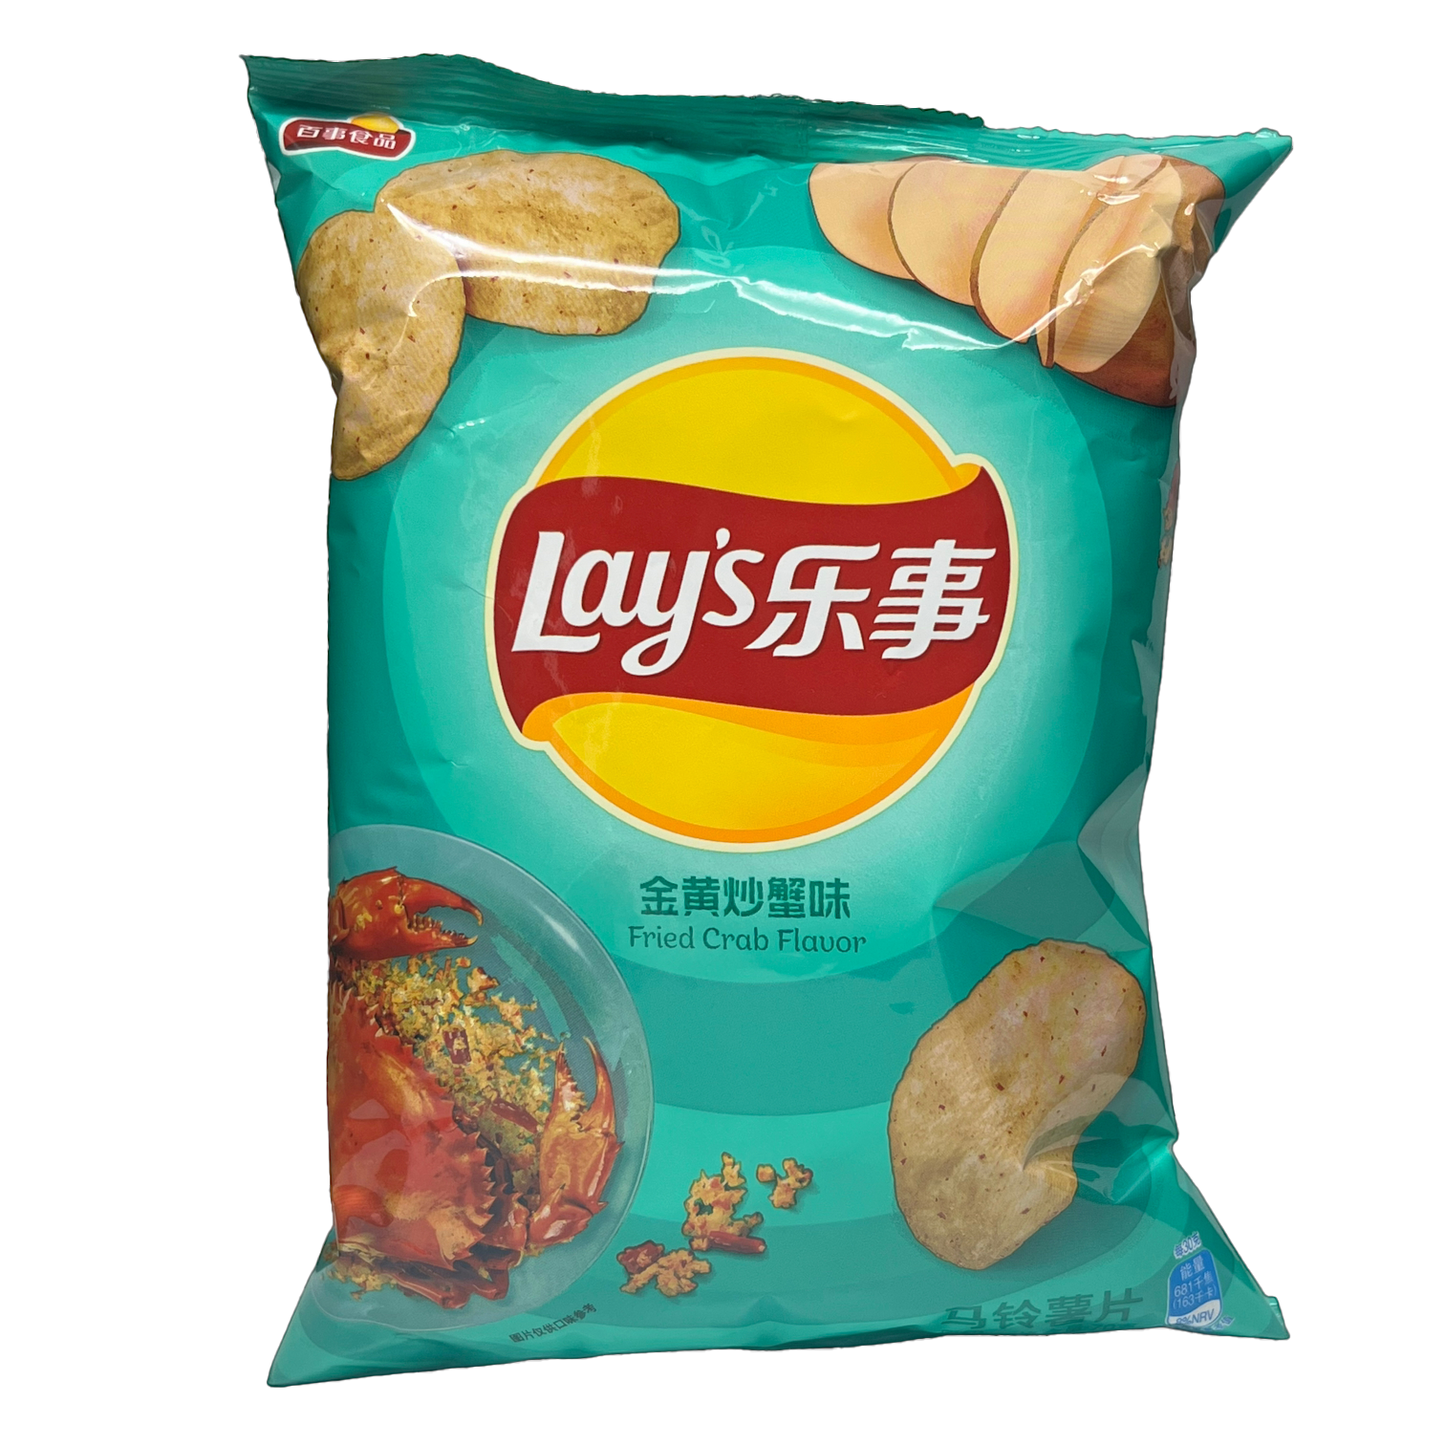 Lays - Fried Crab Flavor